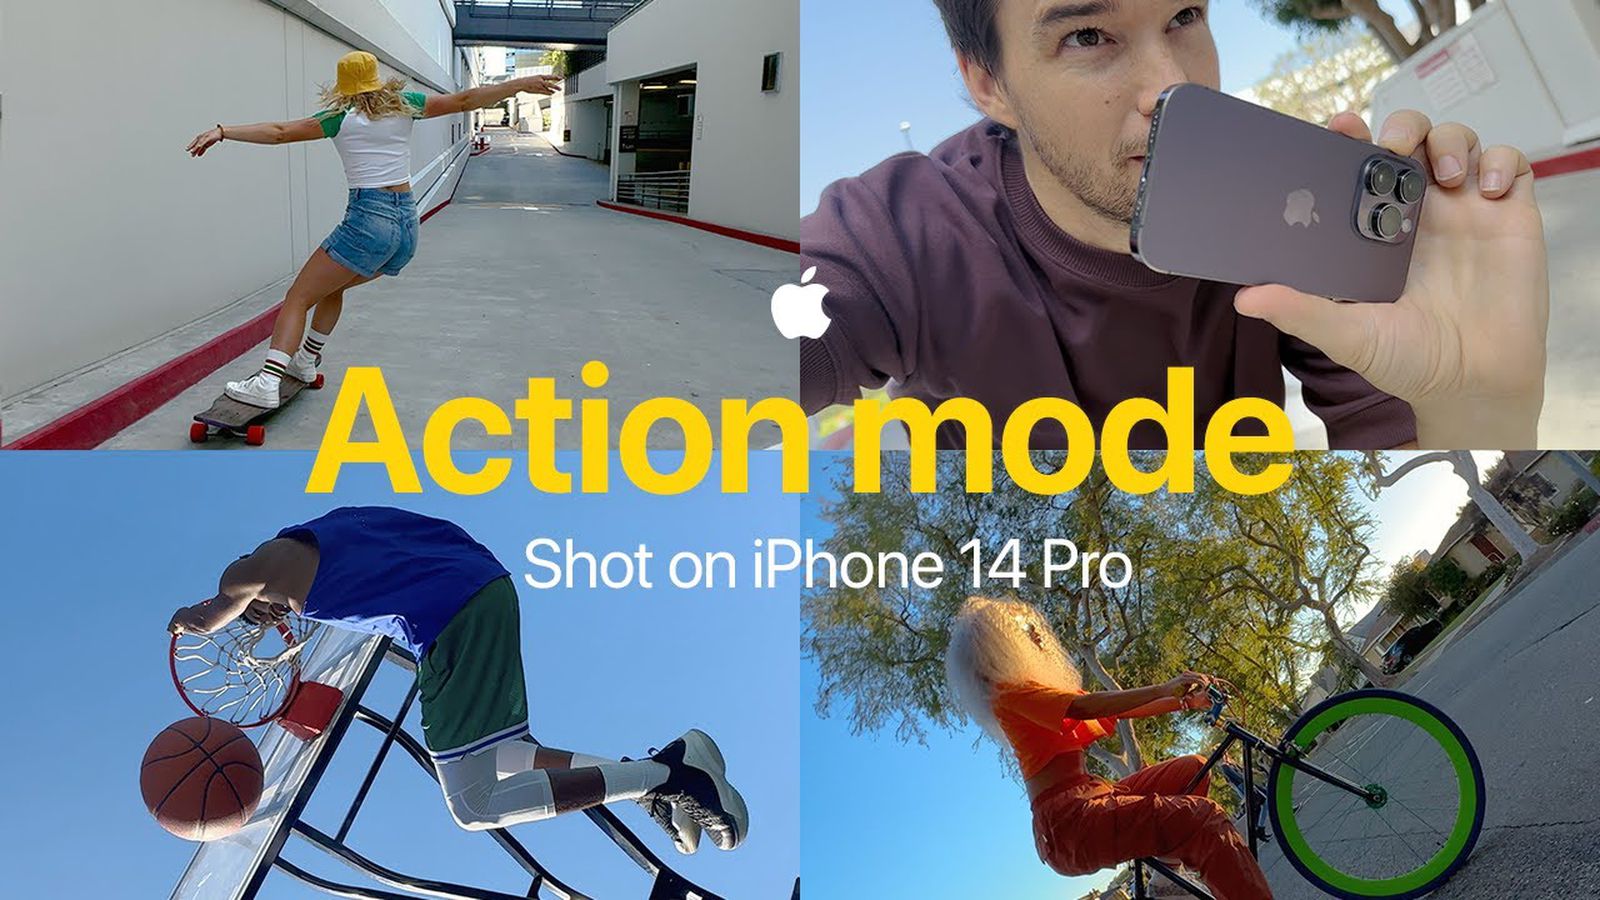 Shot on iPhone Campaign